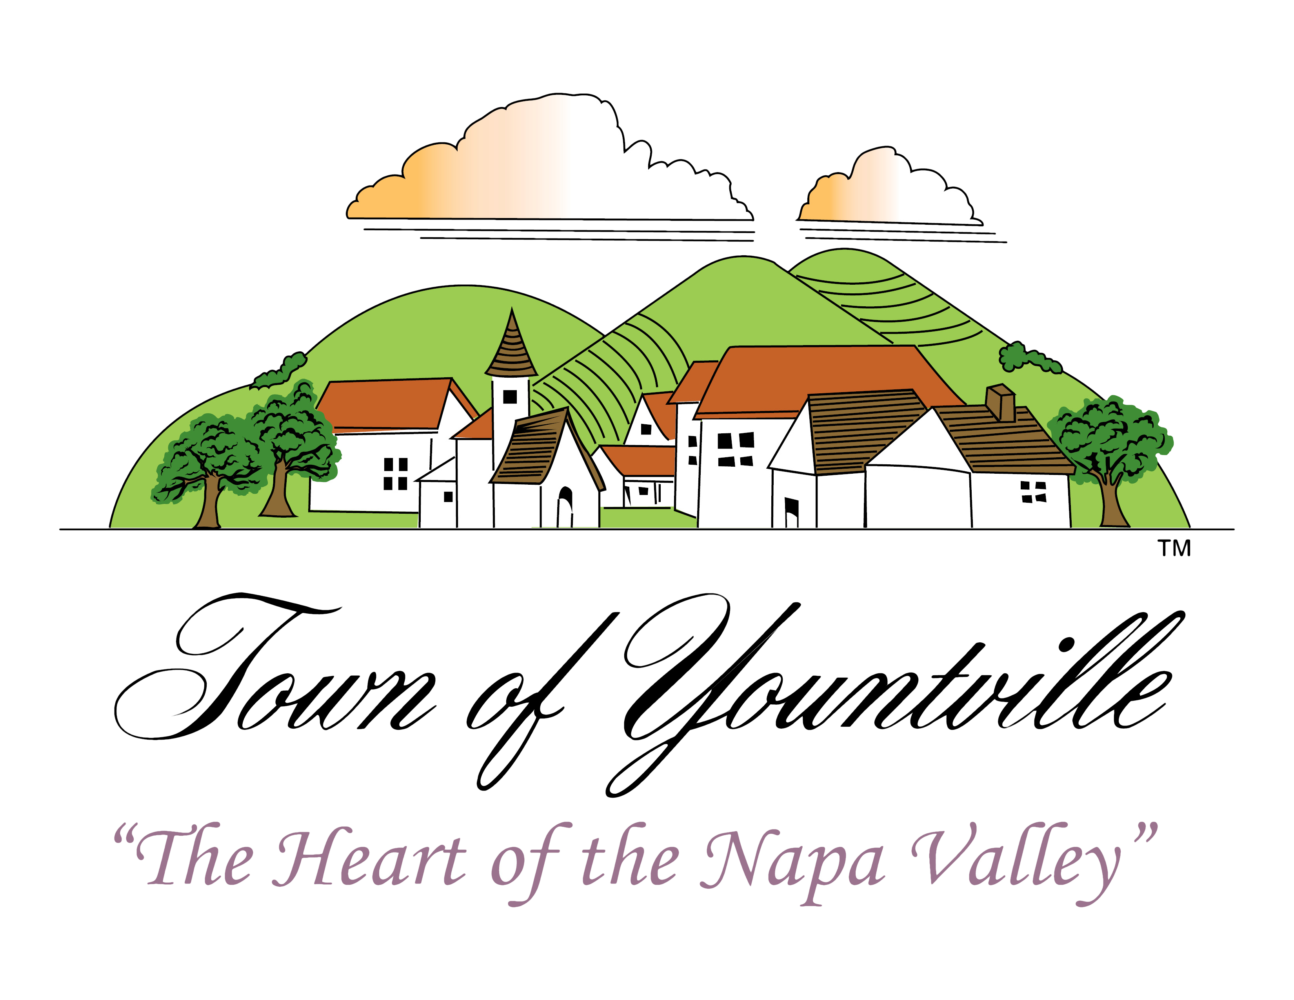 Town of Yountville